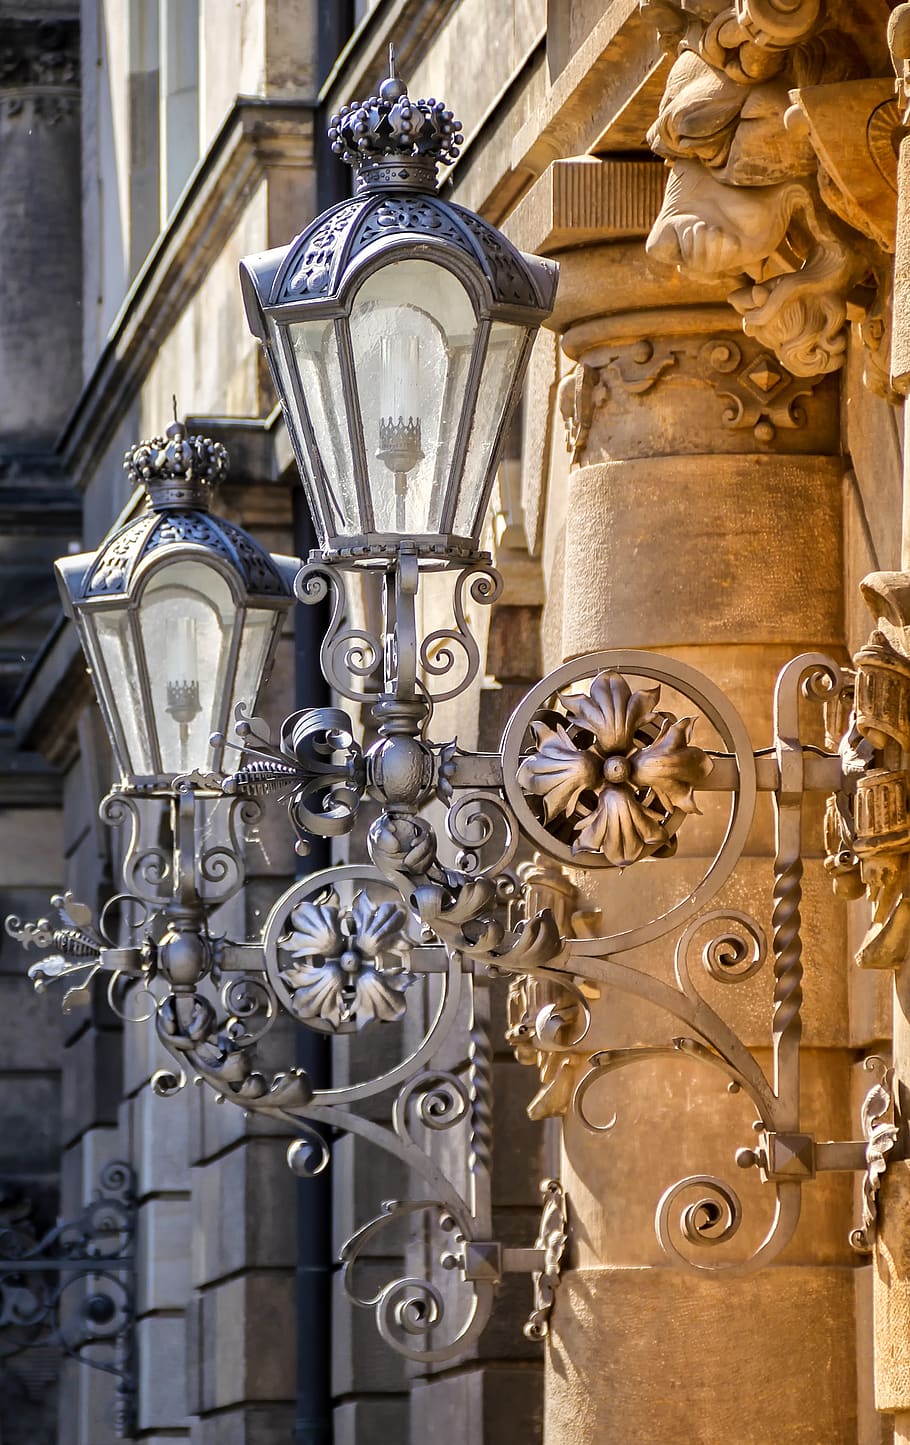 old, lamp, iron, antiquity, candlestick, glass, metal, building, architecture, dresden